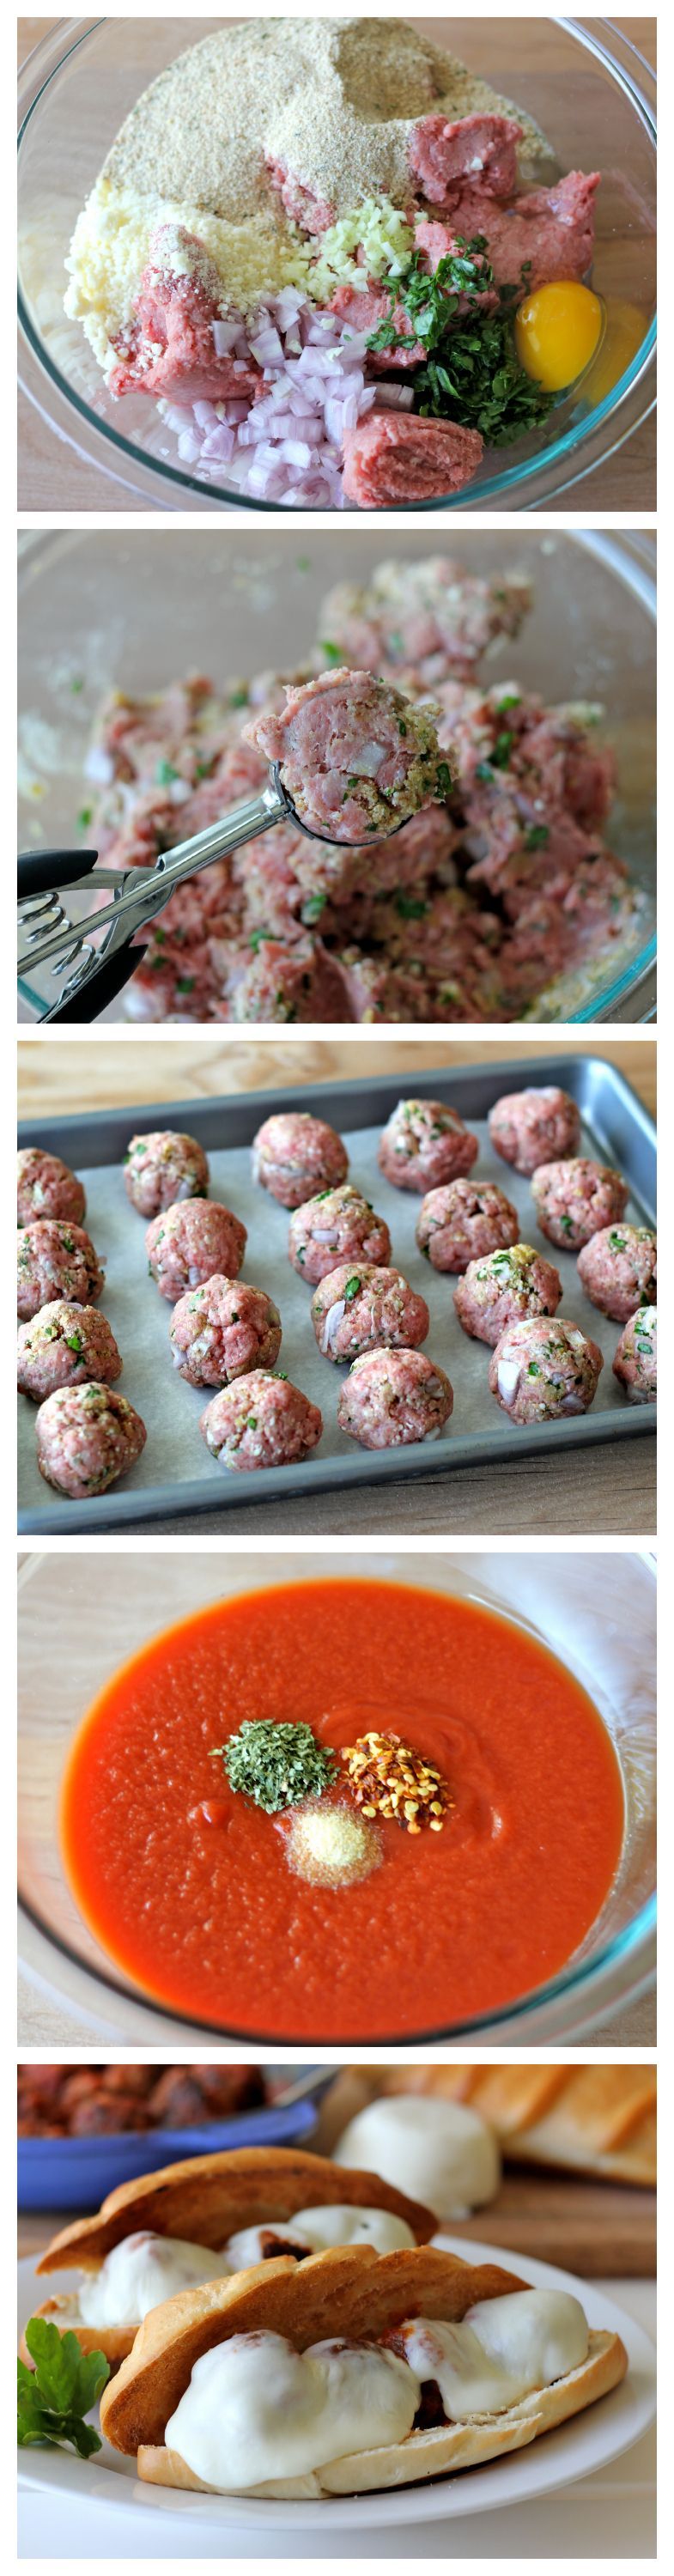 Italian Meatball Sandwiches – The best meatball sub that you can make right at home with an easy homemade marinara!